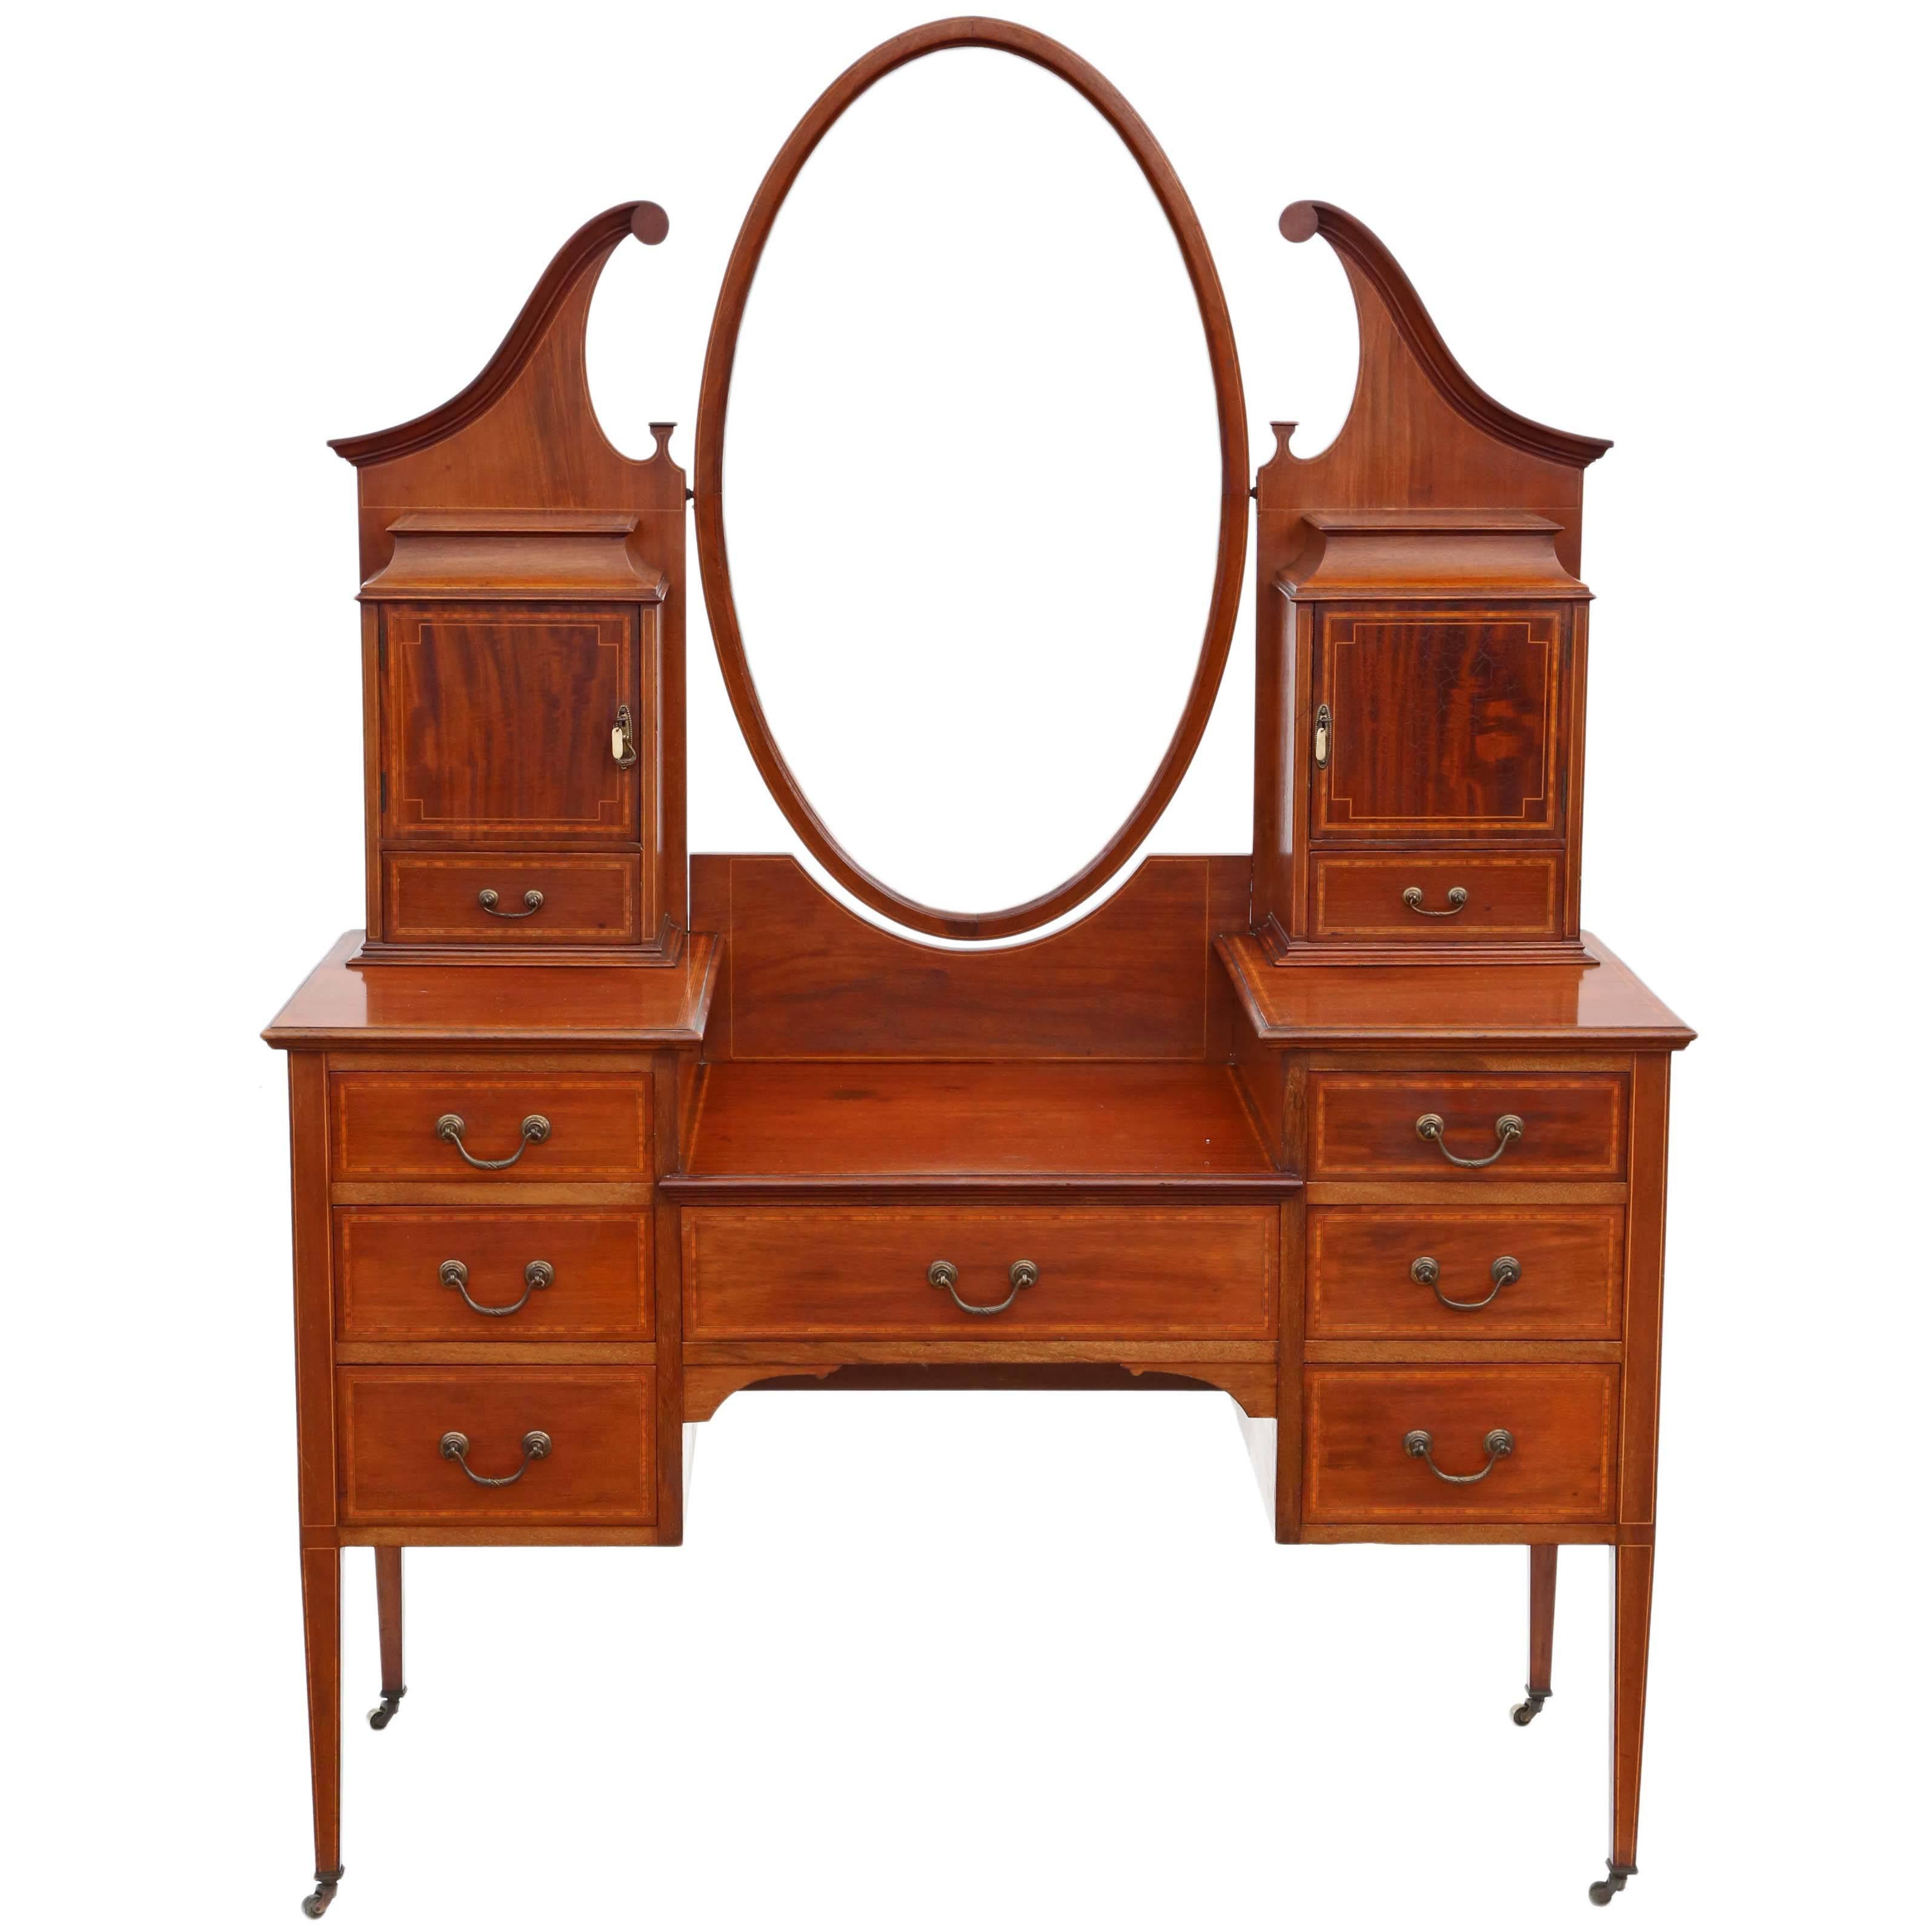 Antique Quality Large Edwardian Inlaid Mahogany Dressing Table For Sale